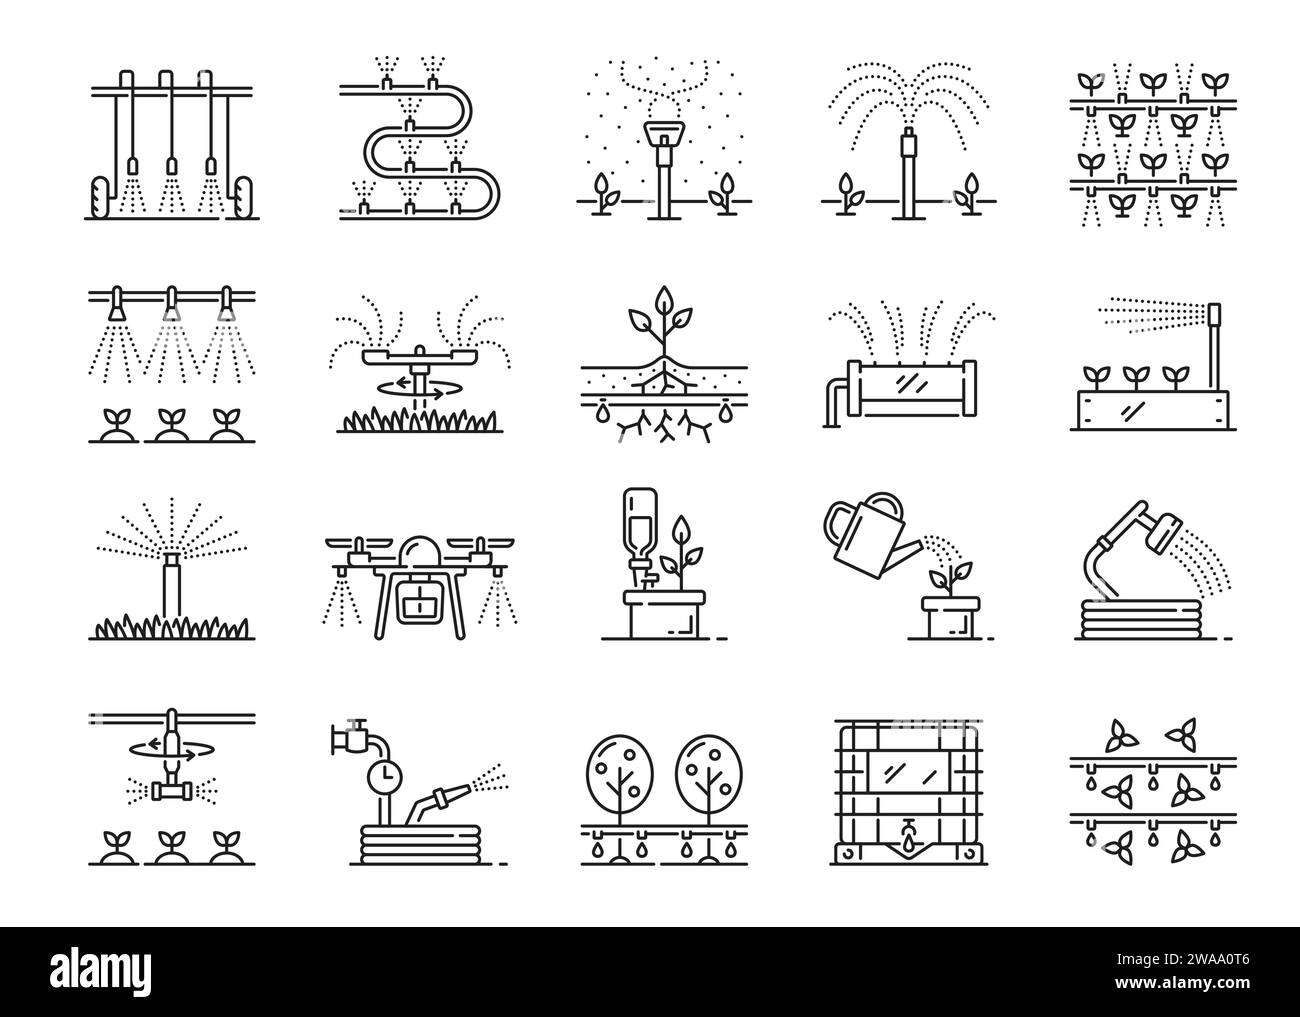 Drip water irrigation system icons. Garden and farm field sprinkler, irrigate technology. Farmland drip watering automatic system, garden aquaponics equipment outline vector pictograms or line signs Stock Vector